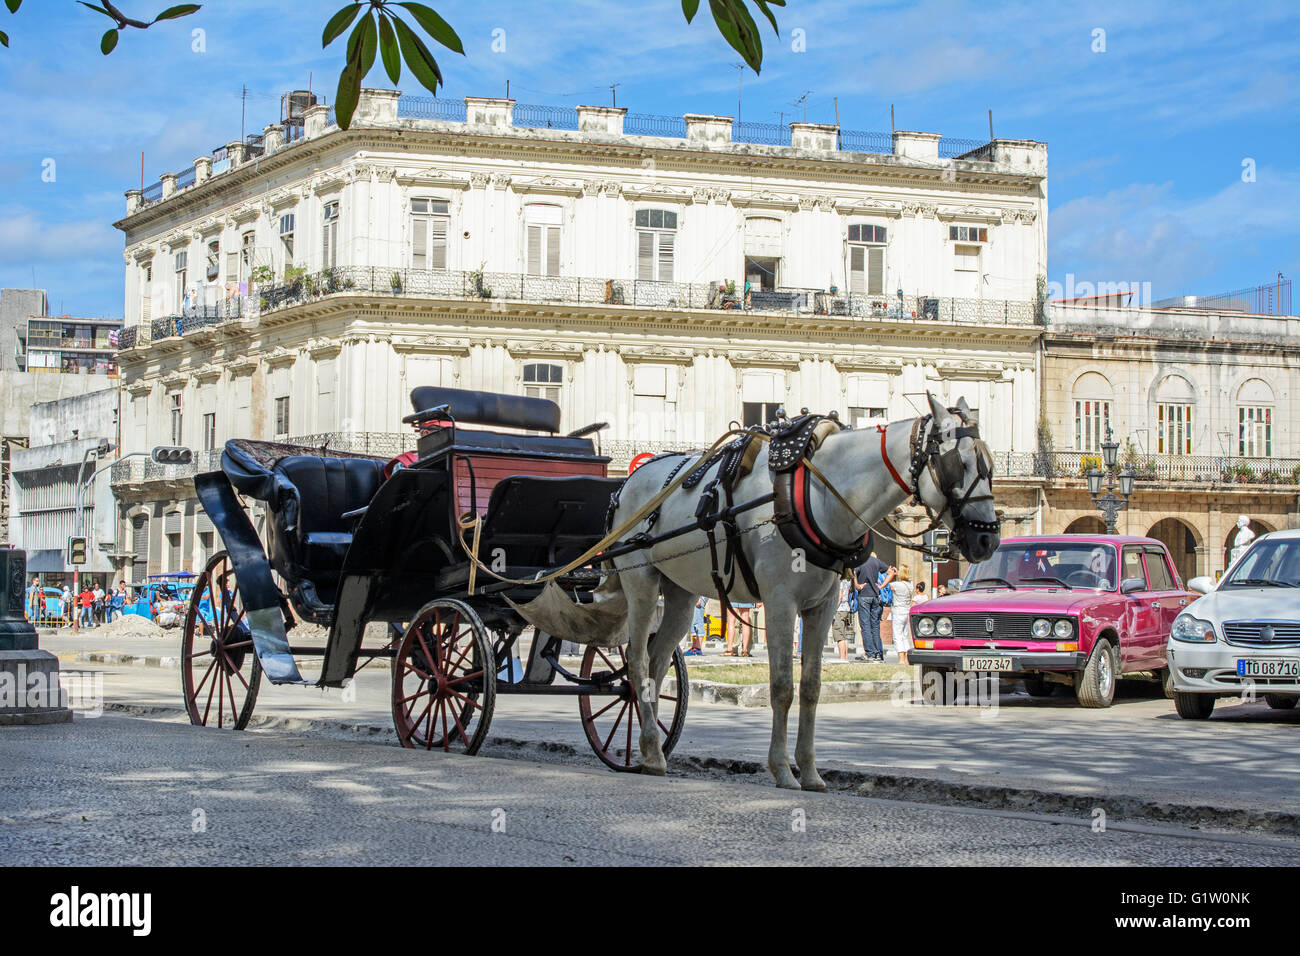 Horse drawn carriage taxi in Parque Central, Old Havana, Cuba Stock Photo